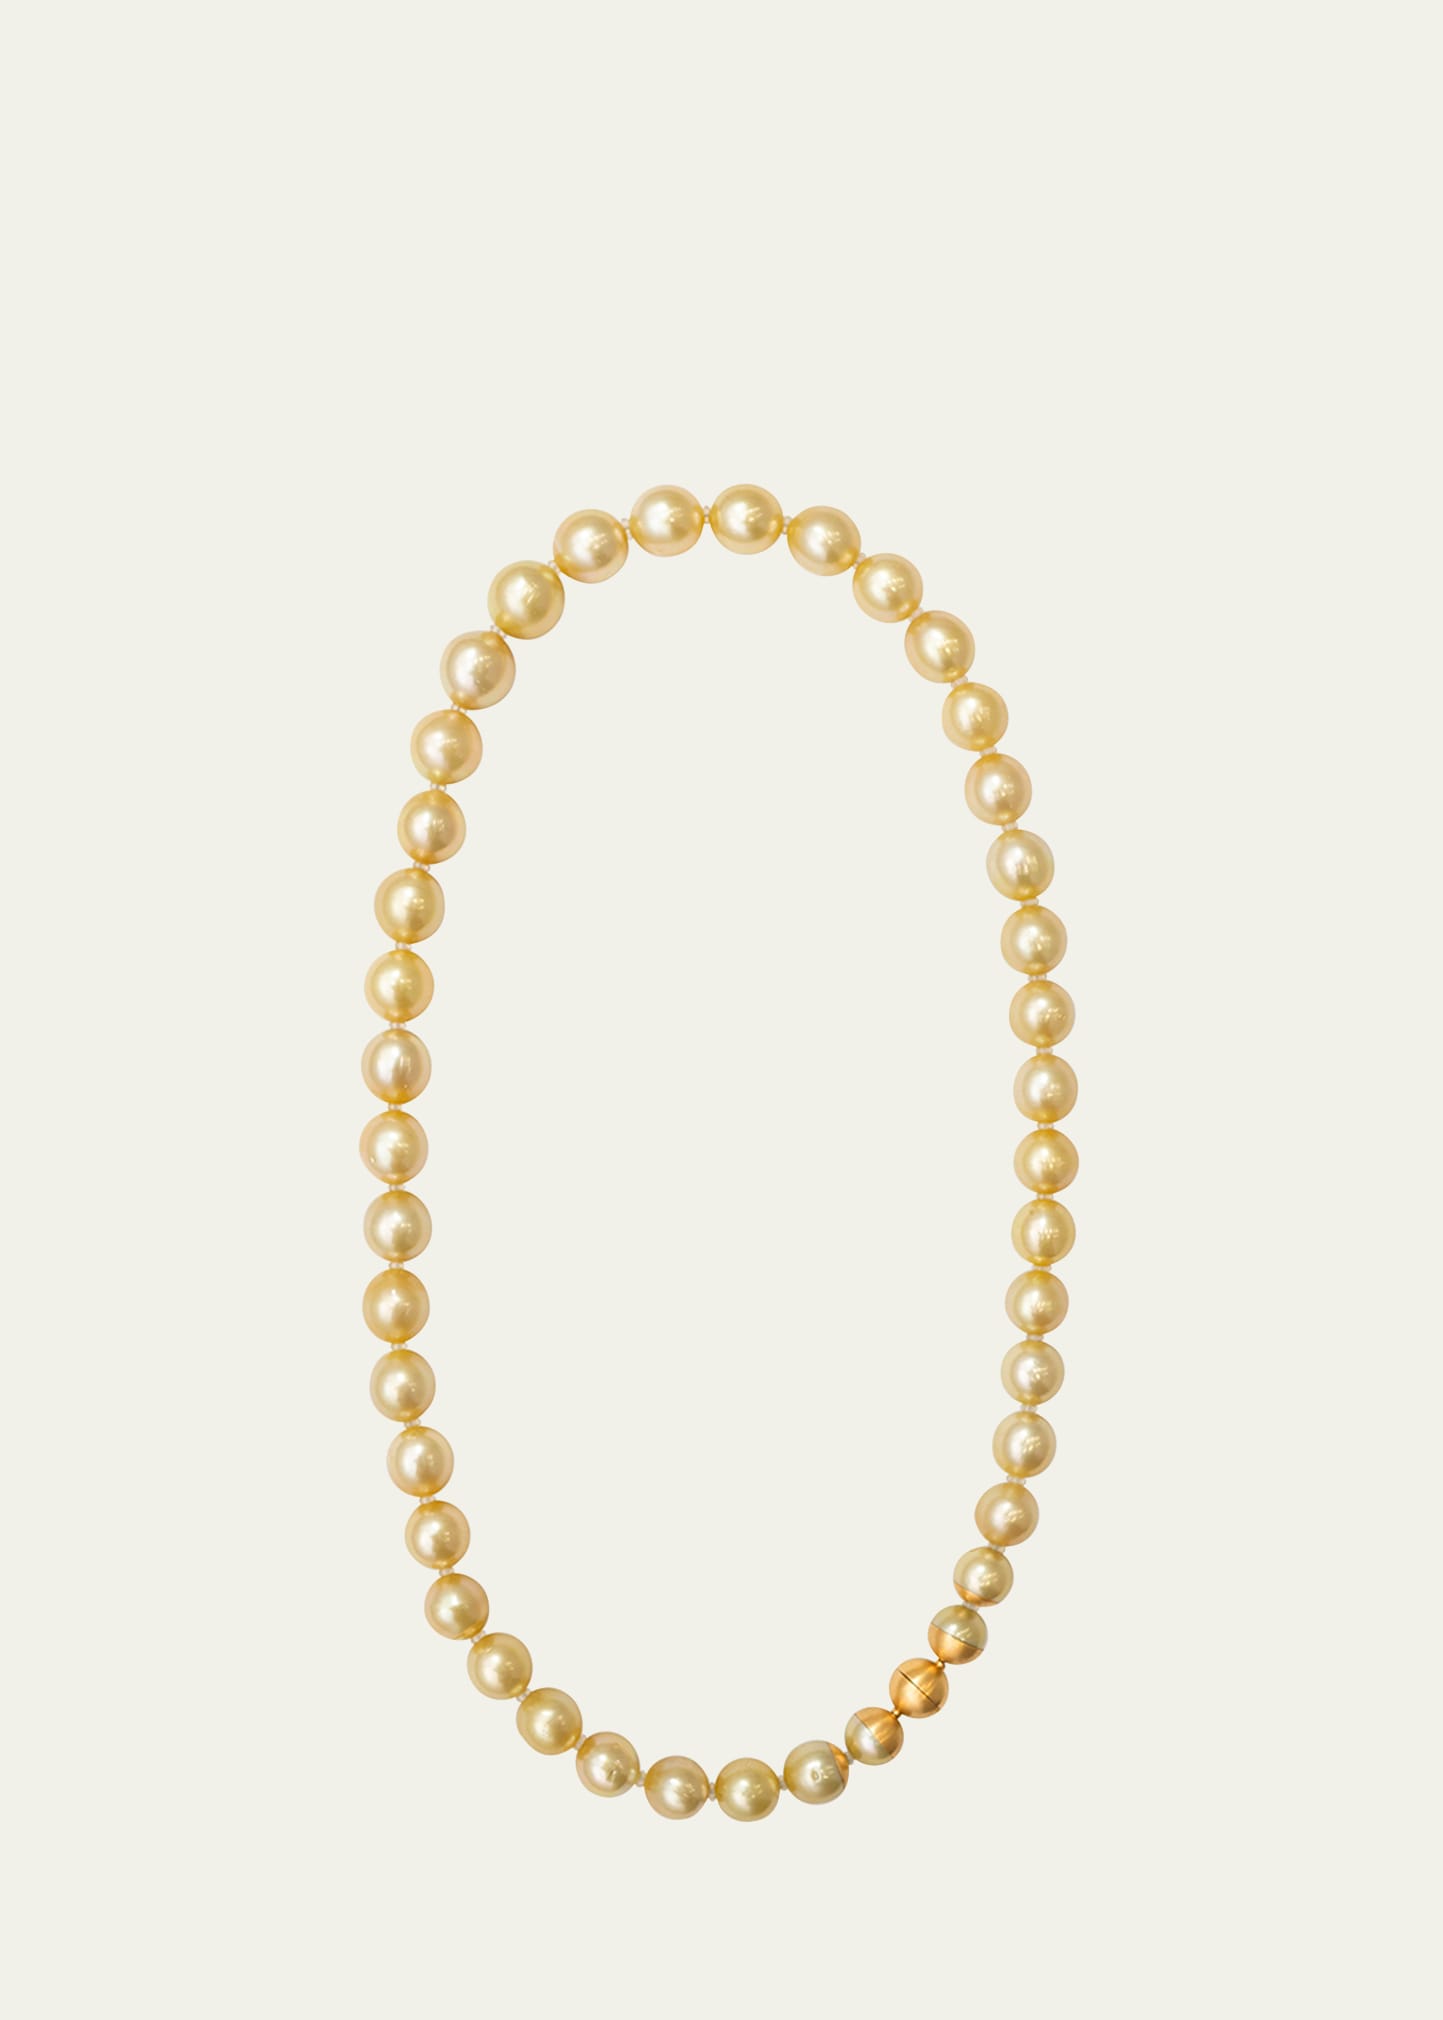 Yutai 18k Yellow Gold Sectional Pearl Necklace With Golden Pearls, 17"l In Gold Multi